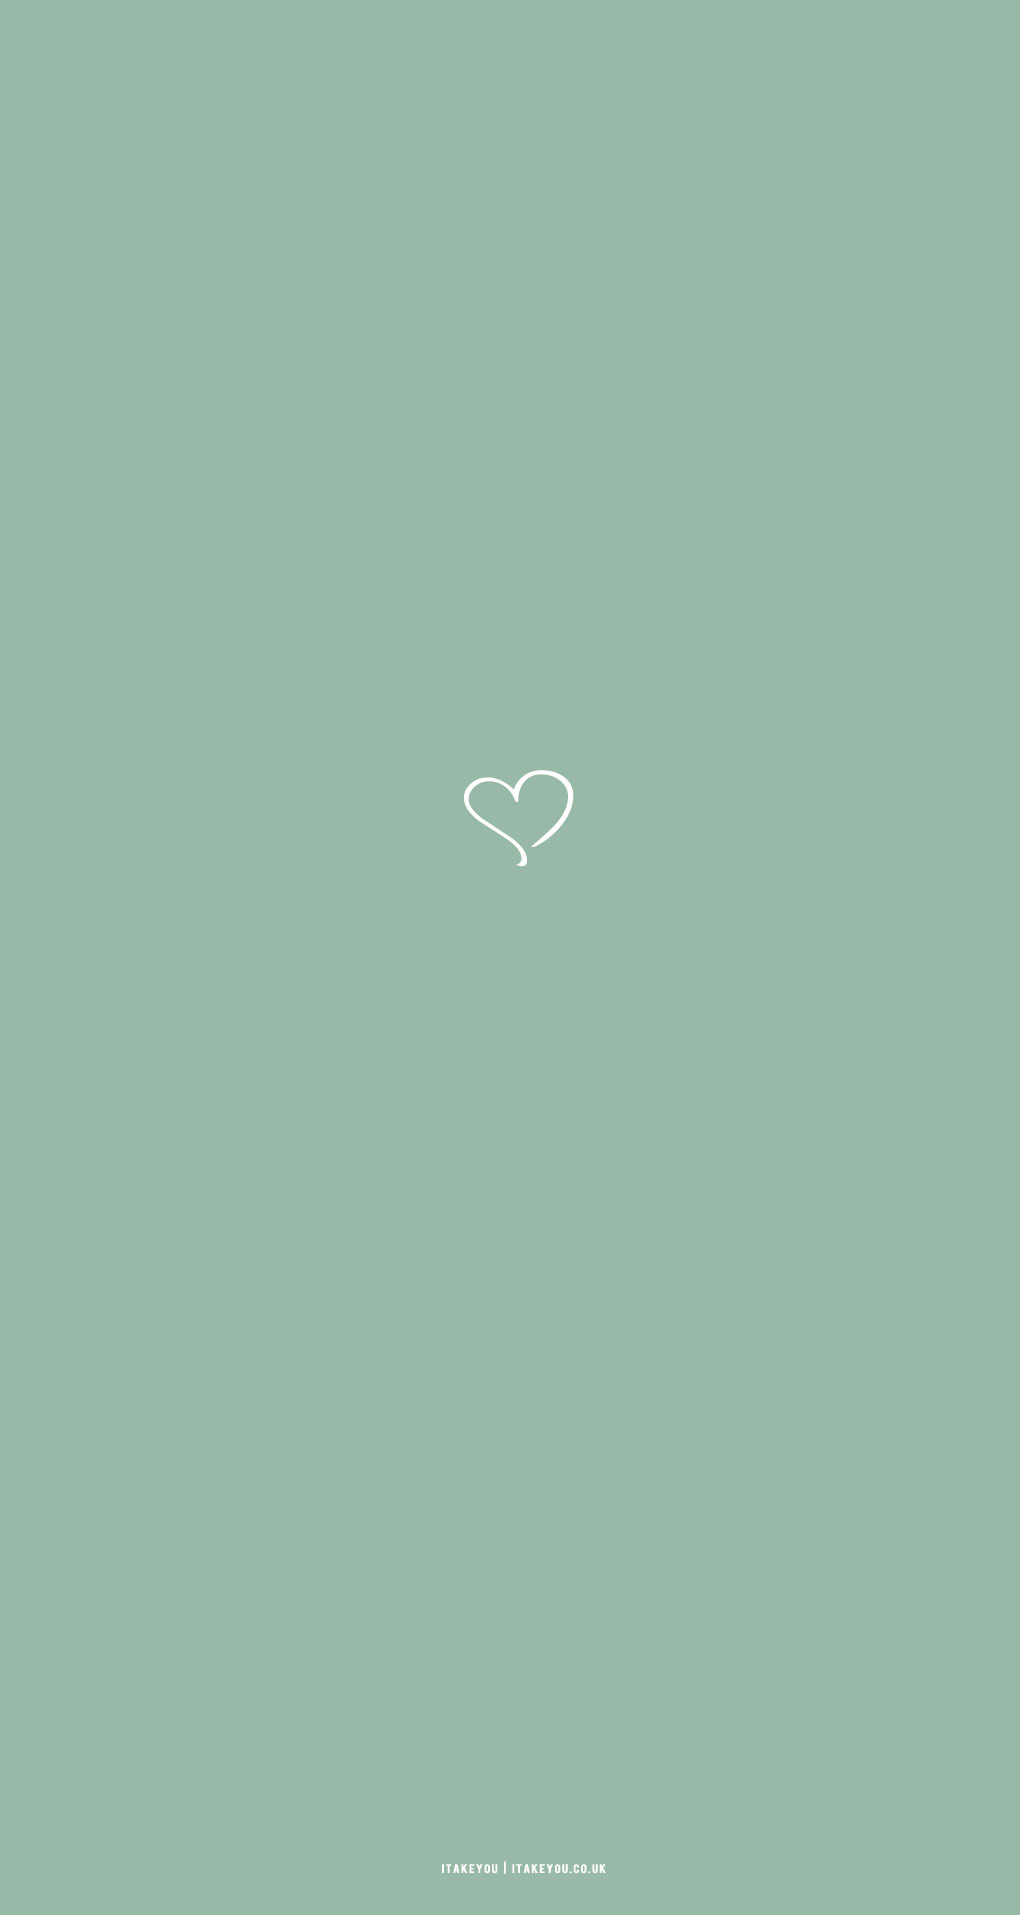 A minimalist phone wallpaper with a white heart on a green background - Sage green